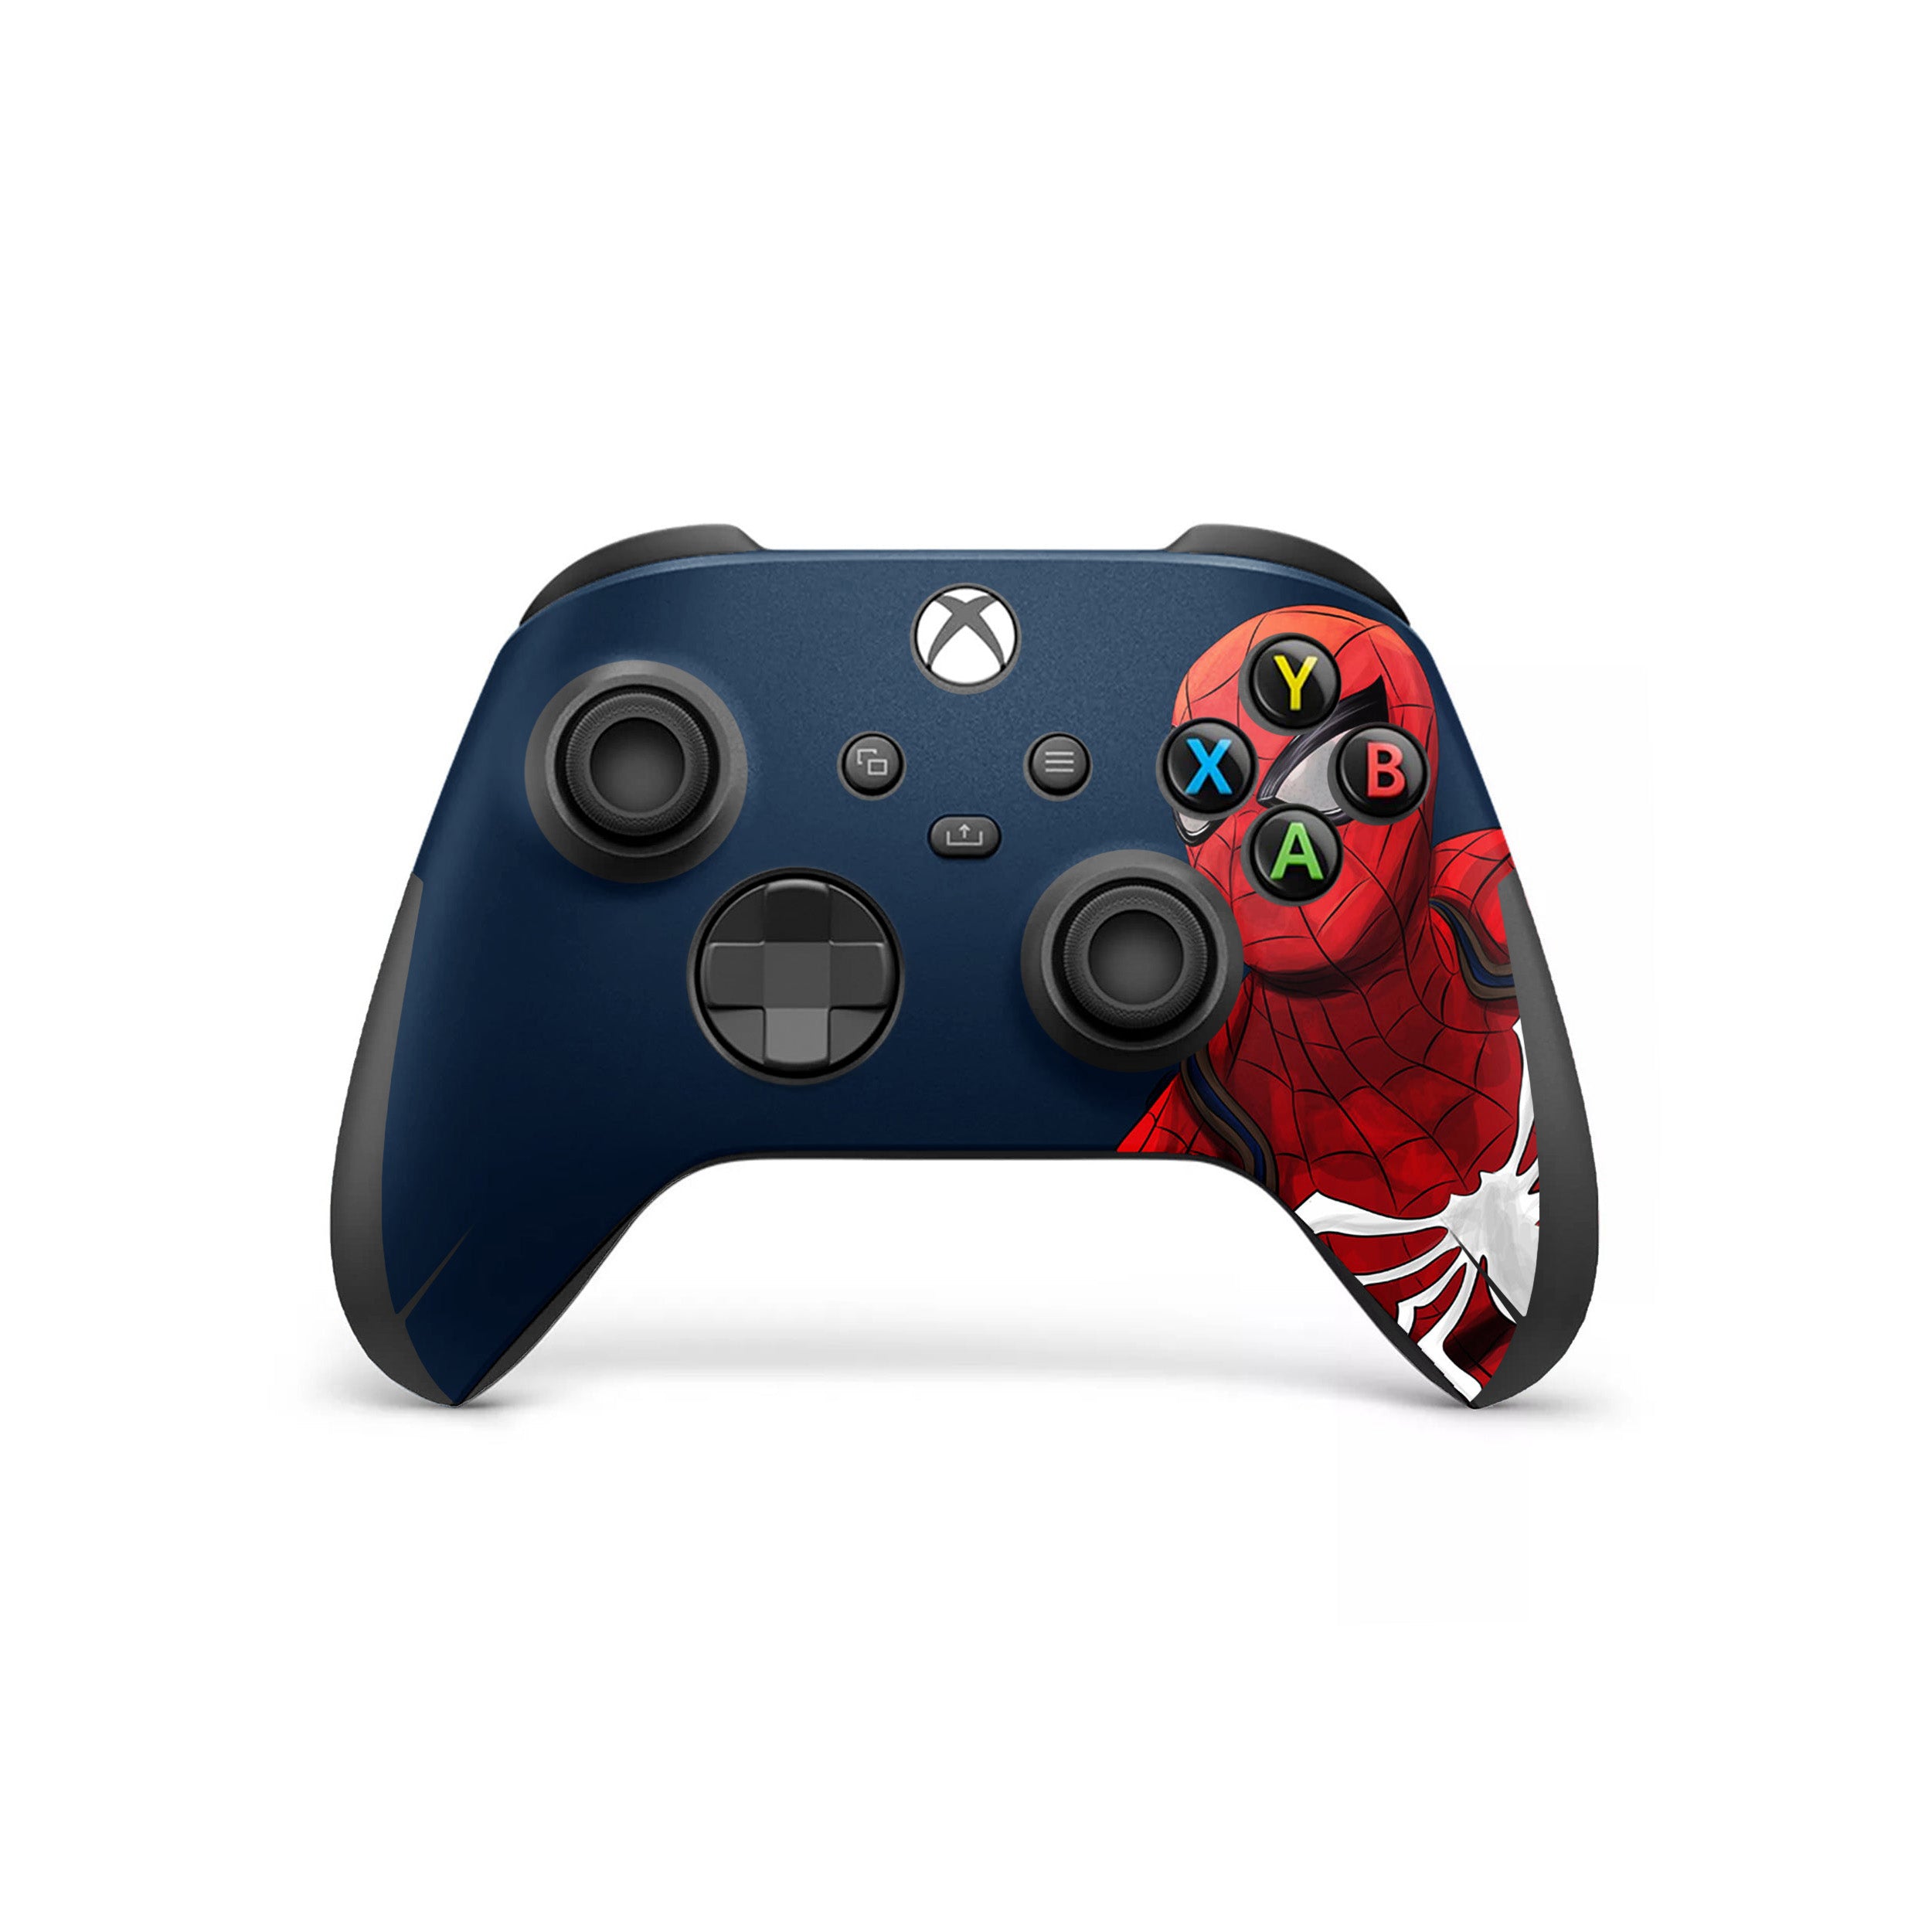 A video game skin featuring a Marvel Spiderman design for the Xbox Wireless Controller.